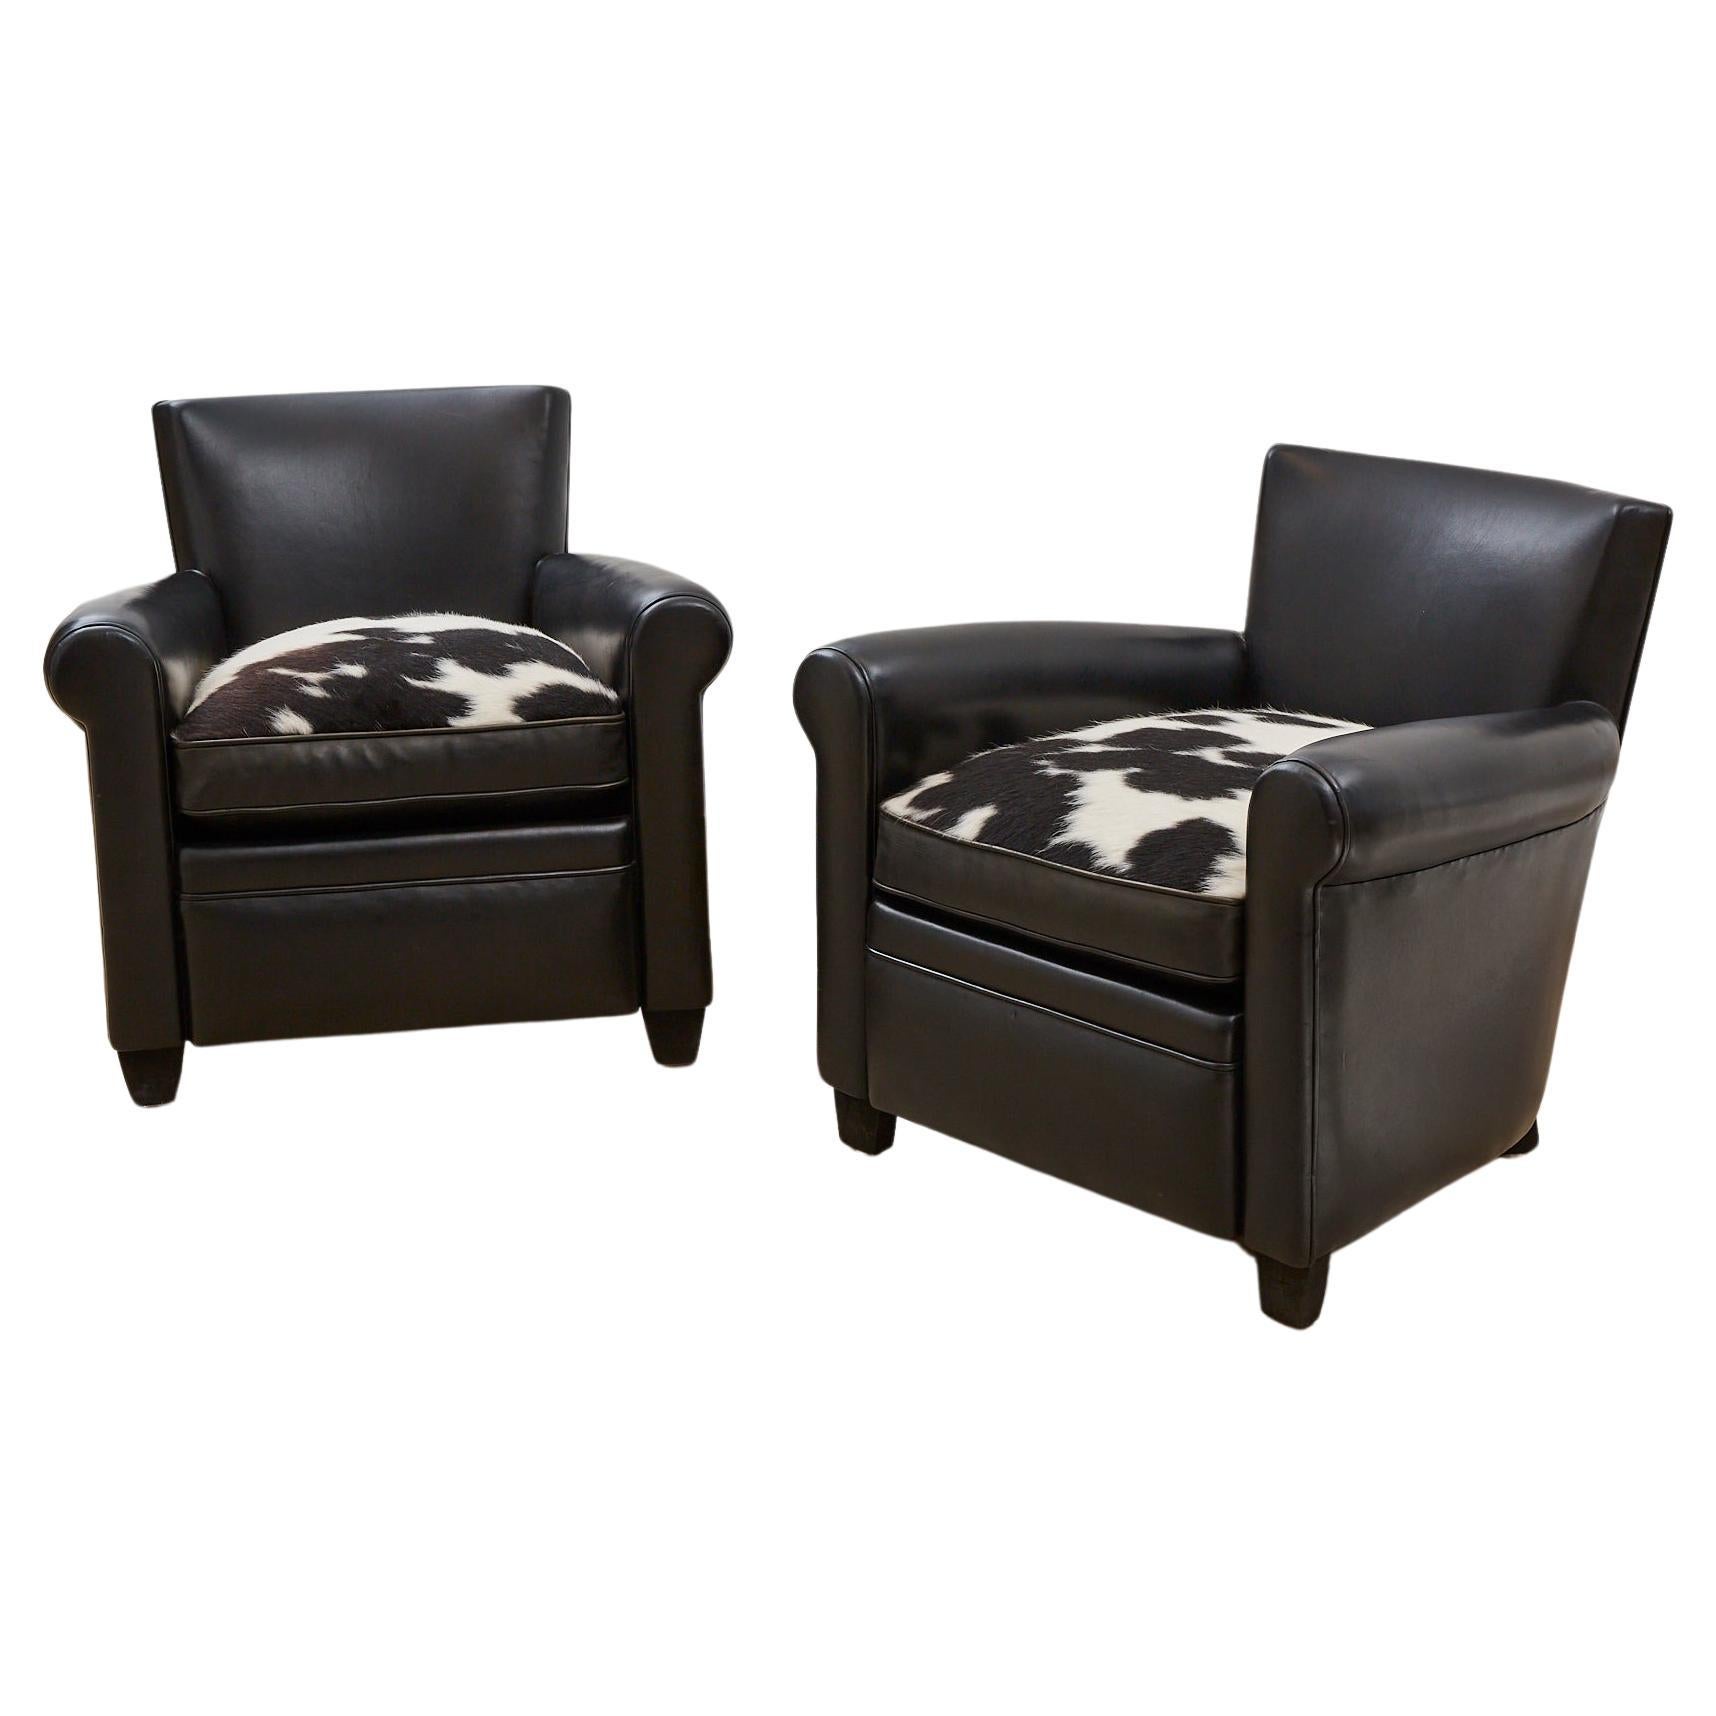 Pair of Black leather club chair / armchair cow hide seat